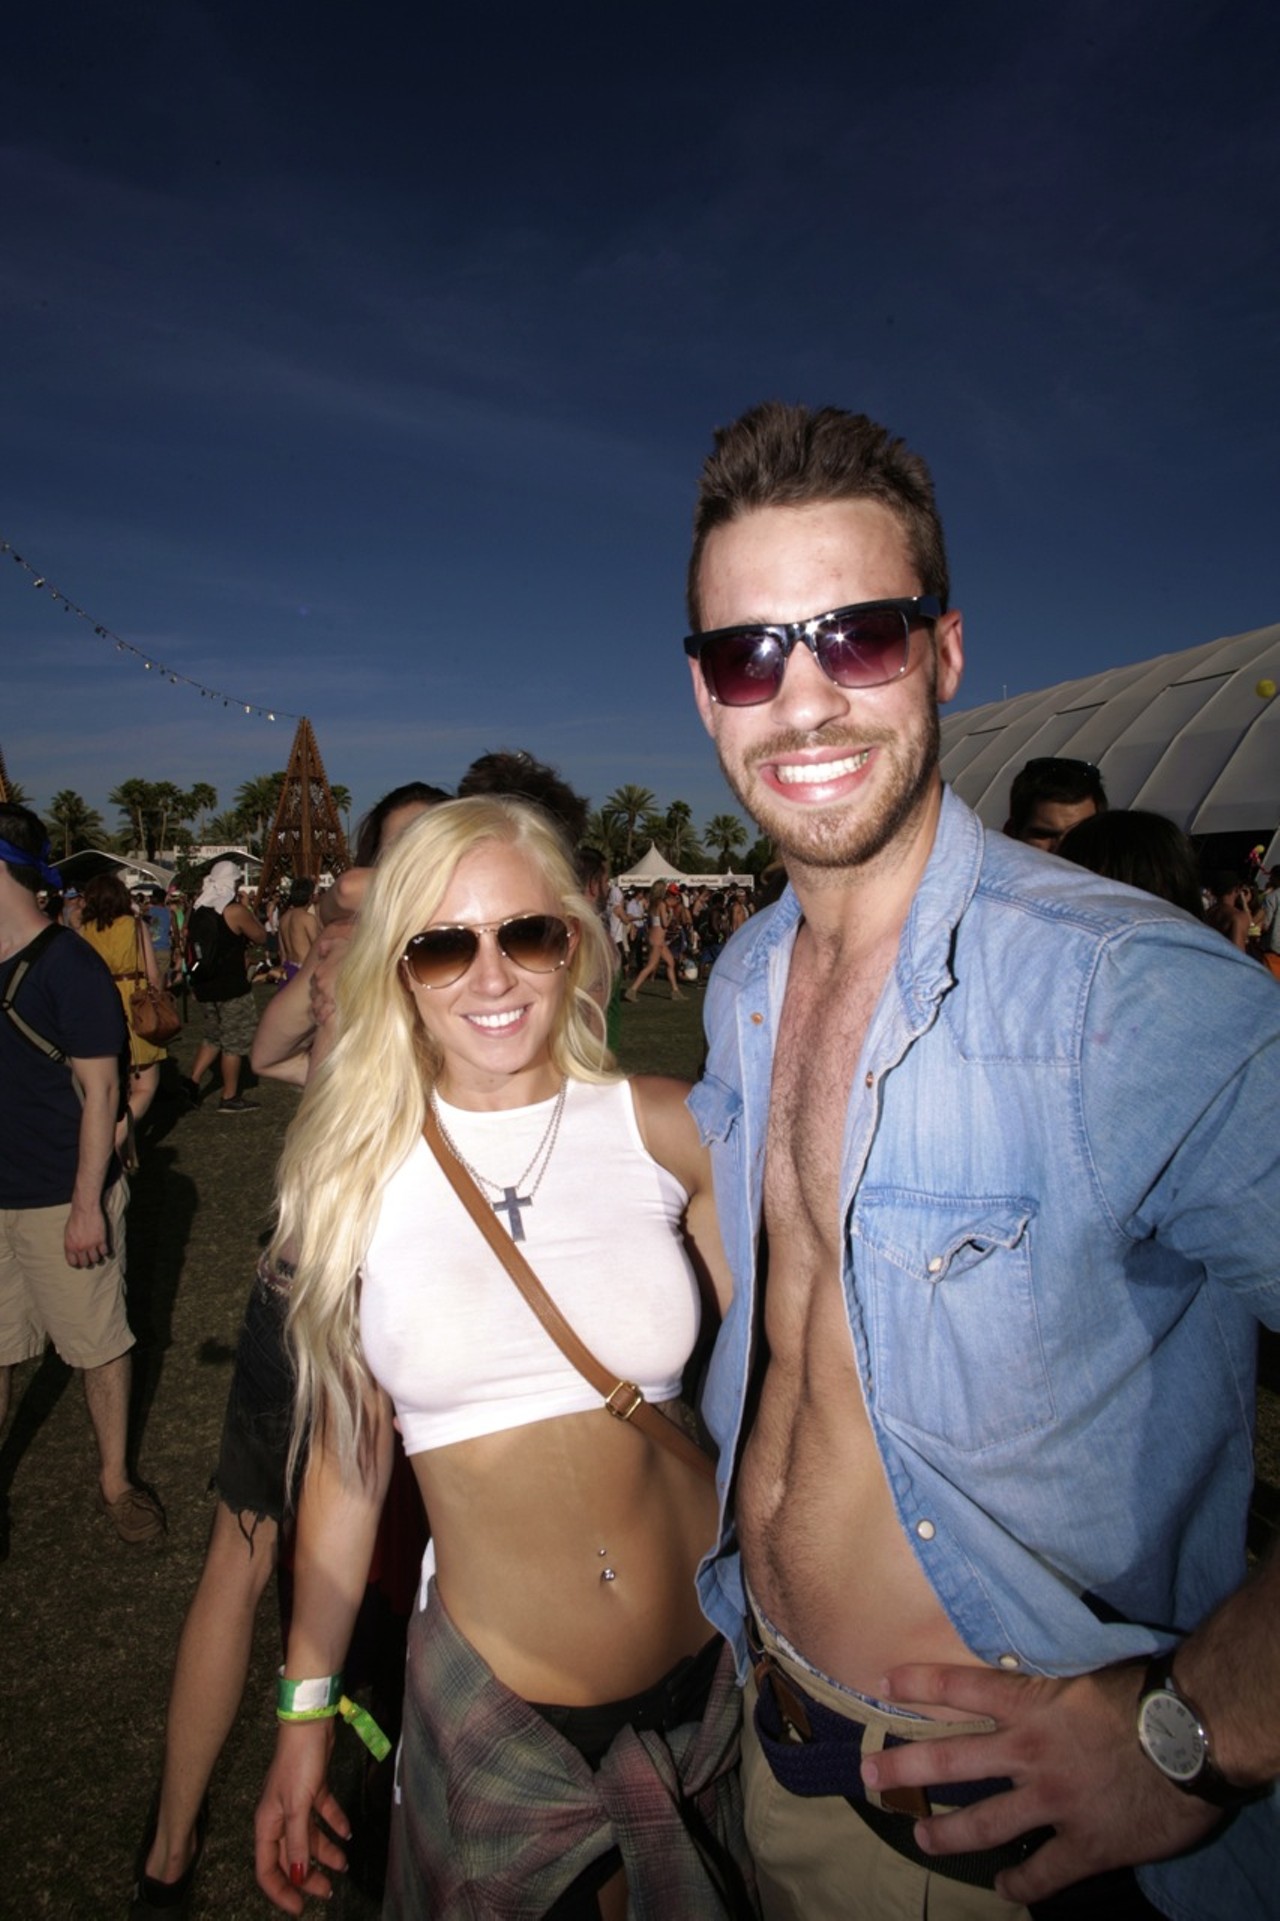 Coachella 2013: She's Out of Your League, Bro